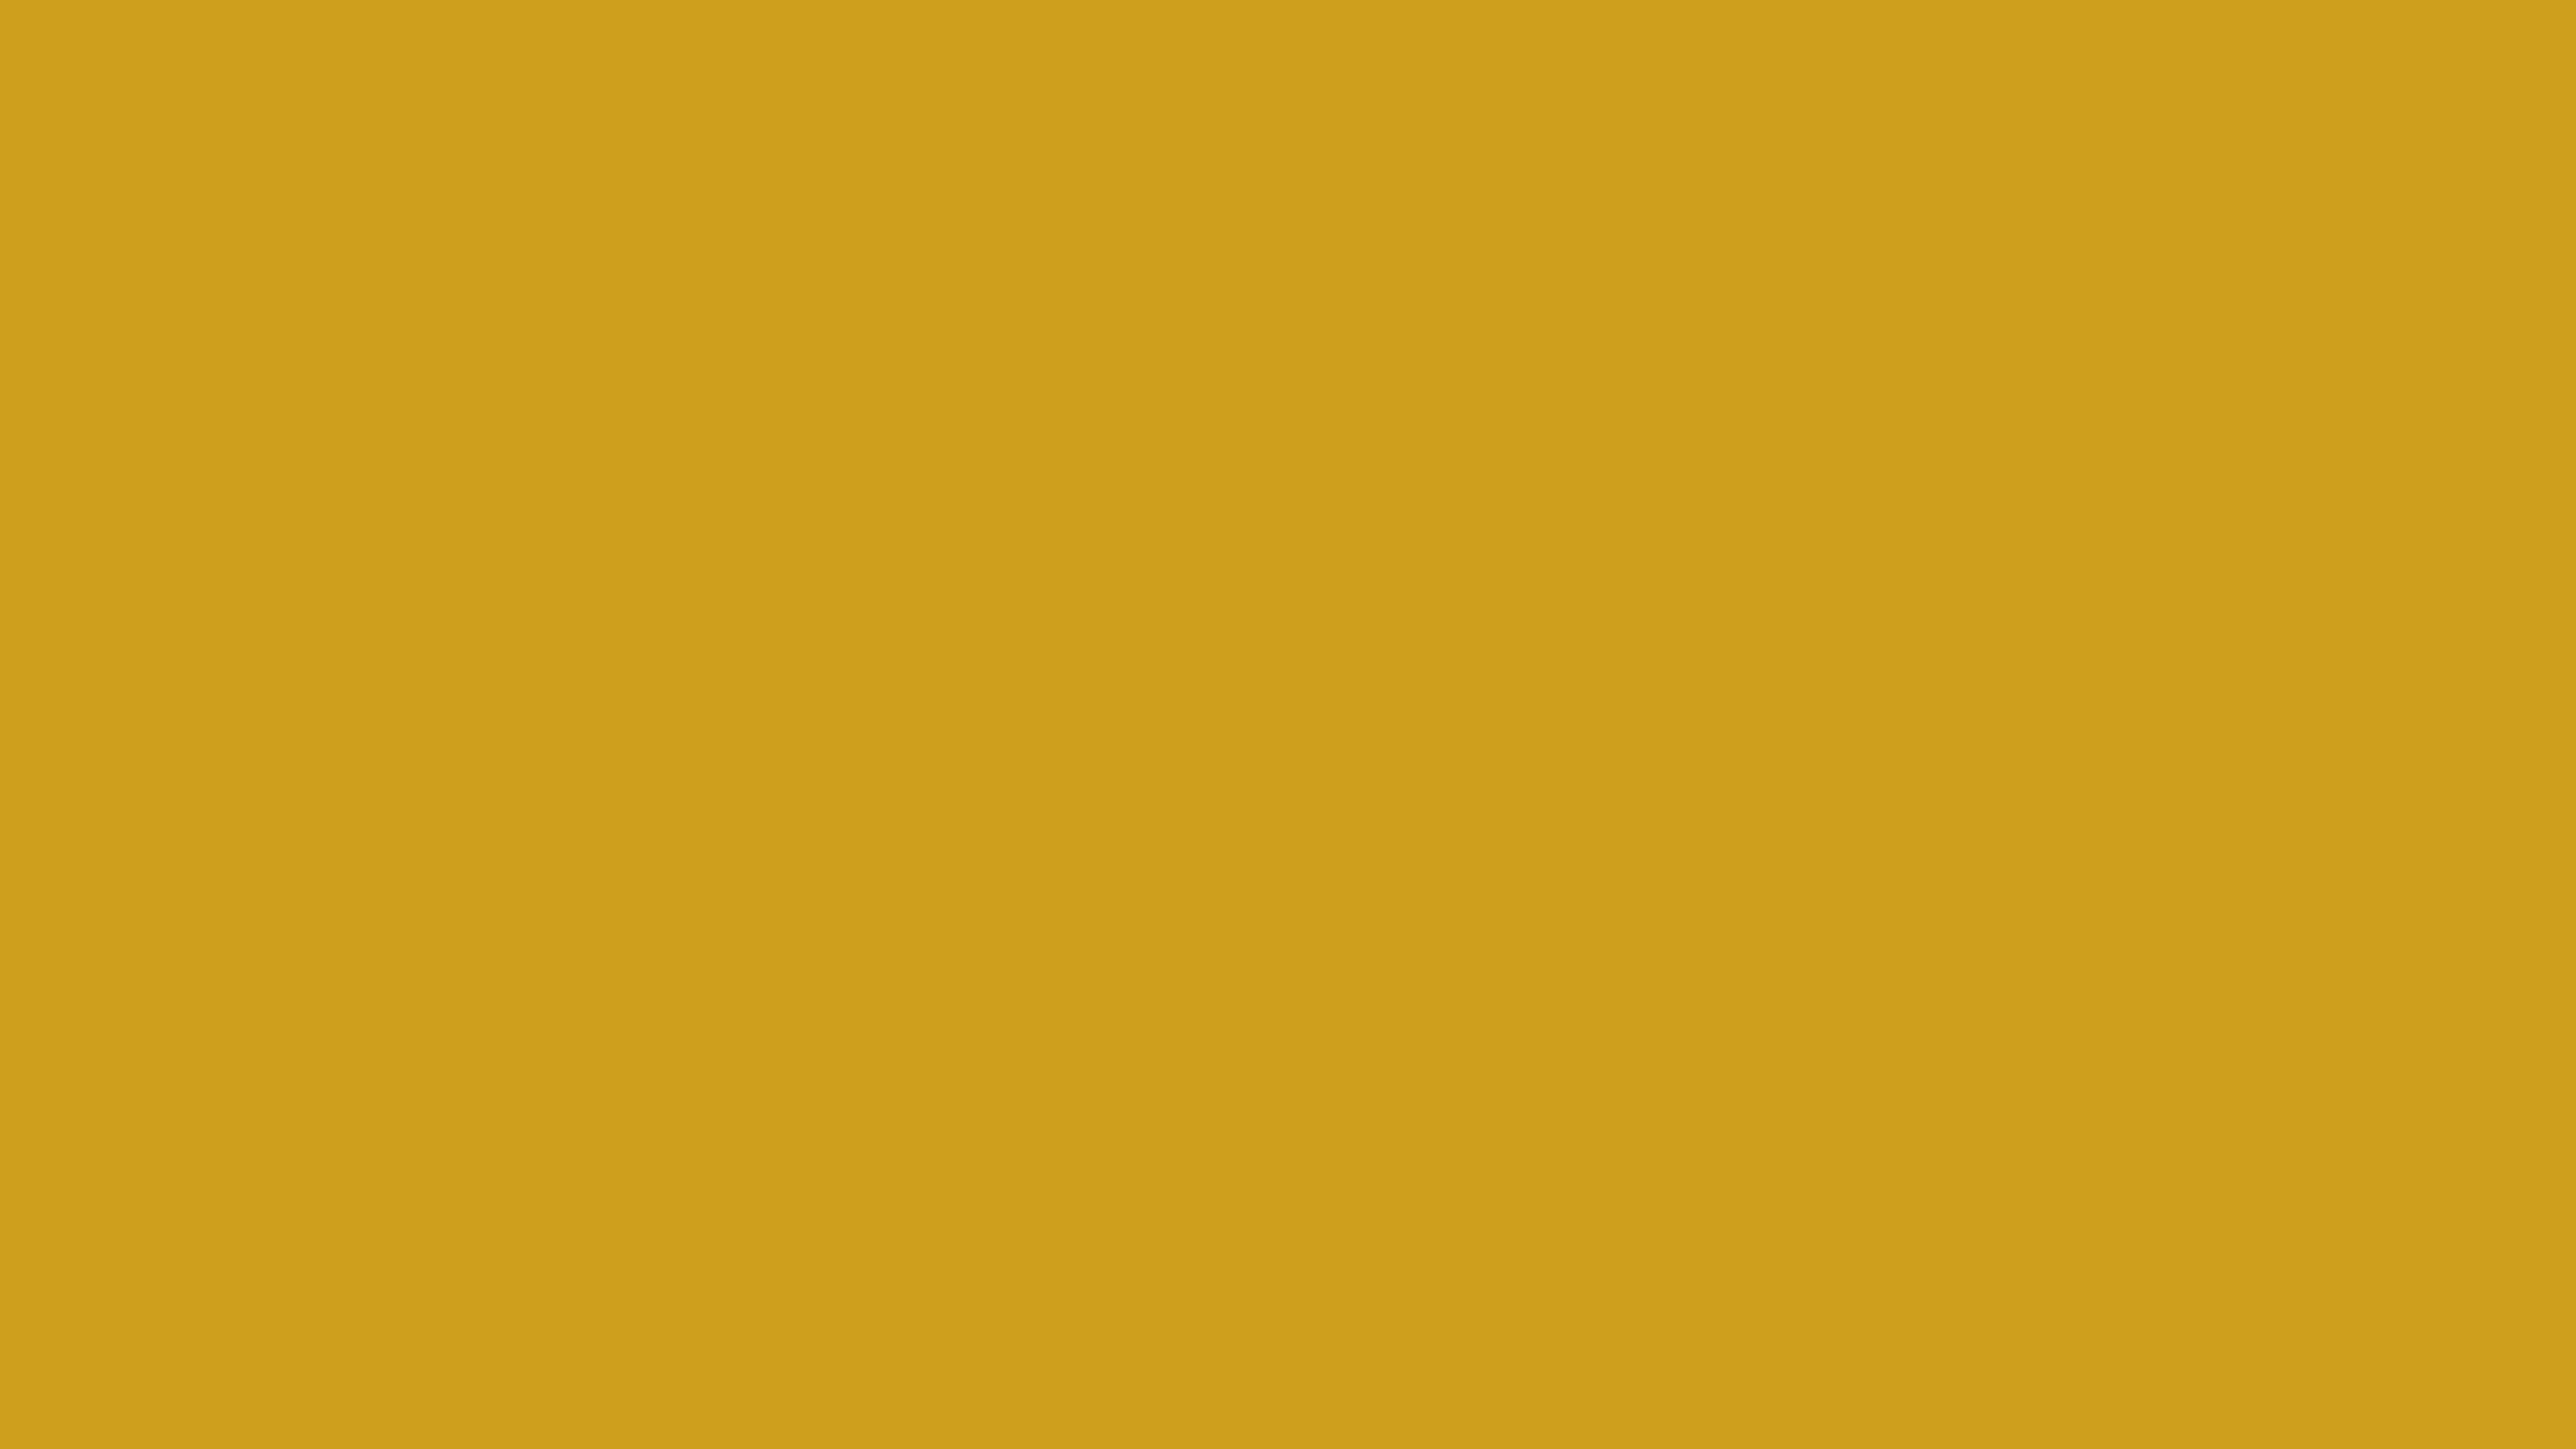 7680x4320 Lemon Curry Solid Color Background